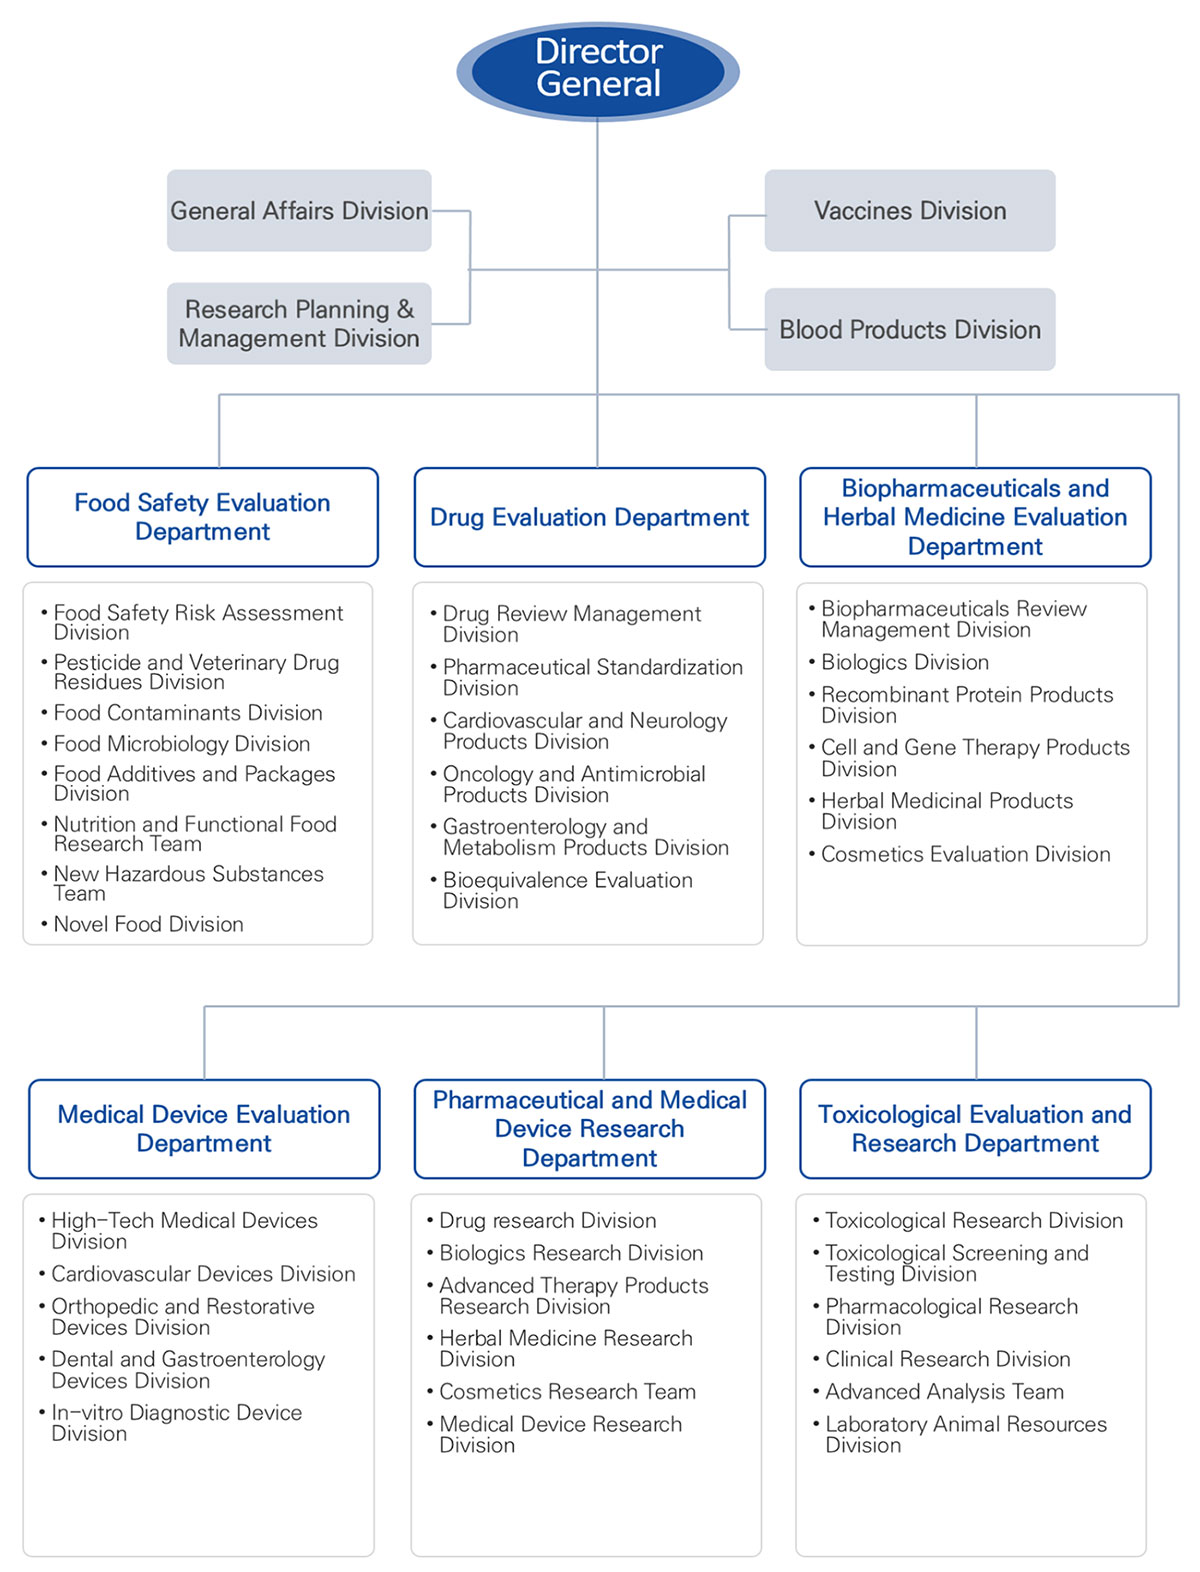 Organization of National Institute of Food and Drug Safety Evaluation.